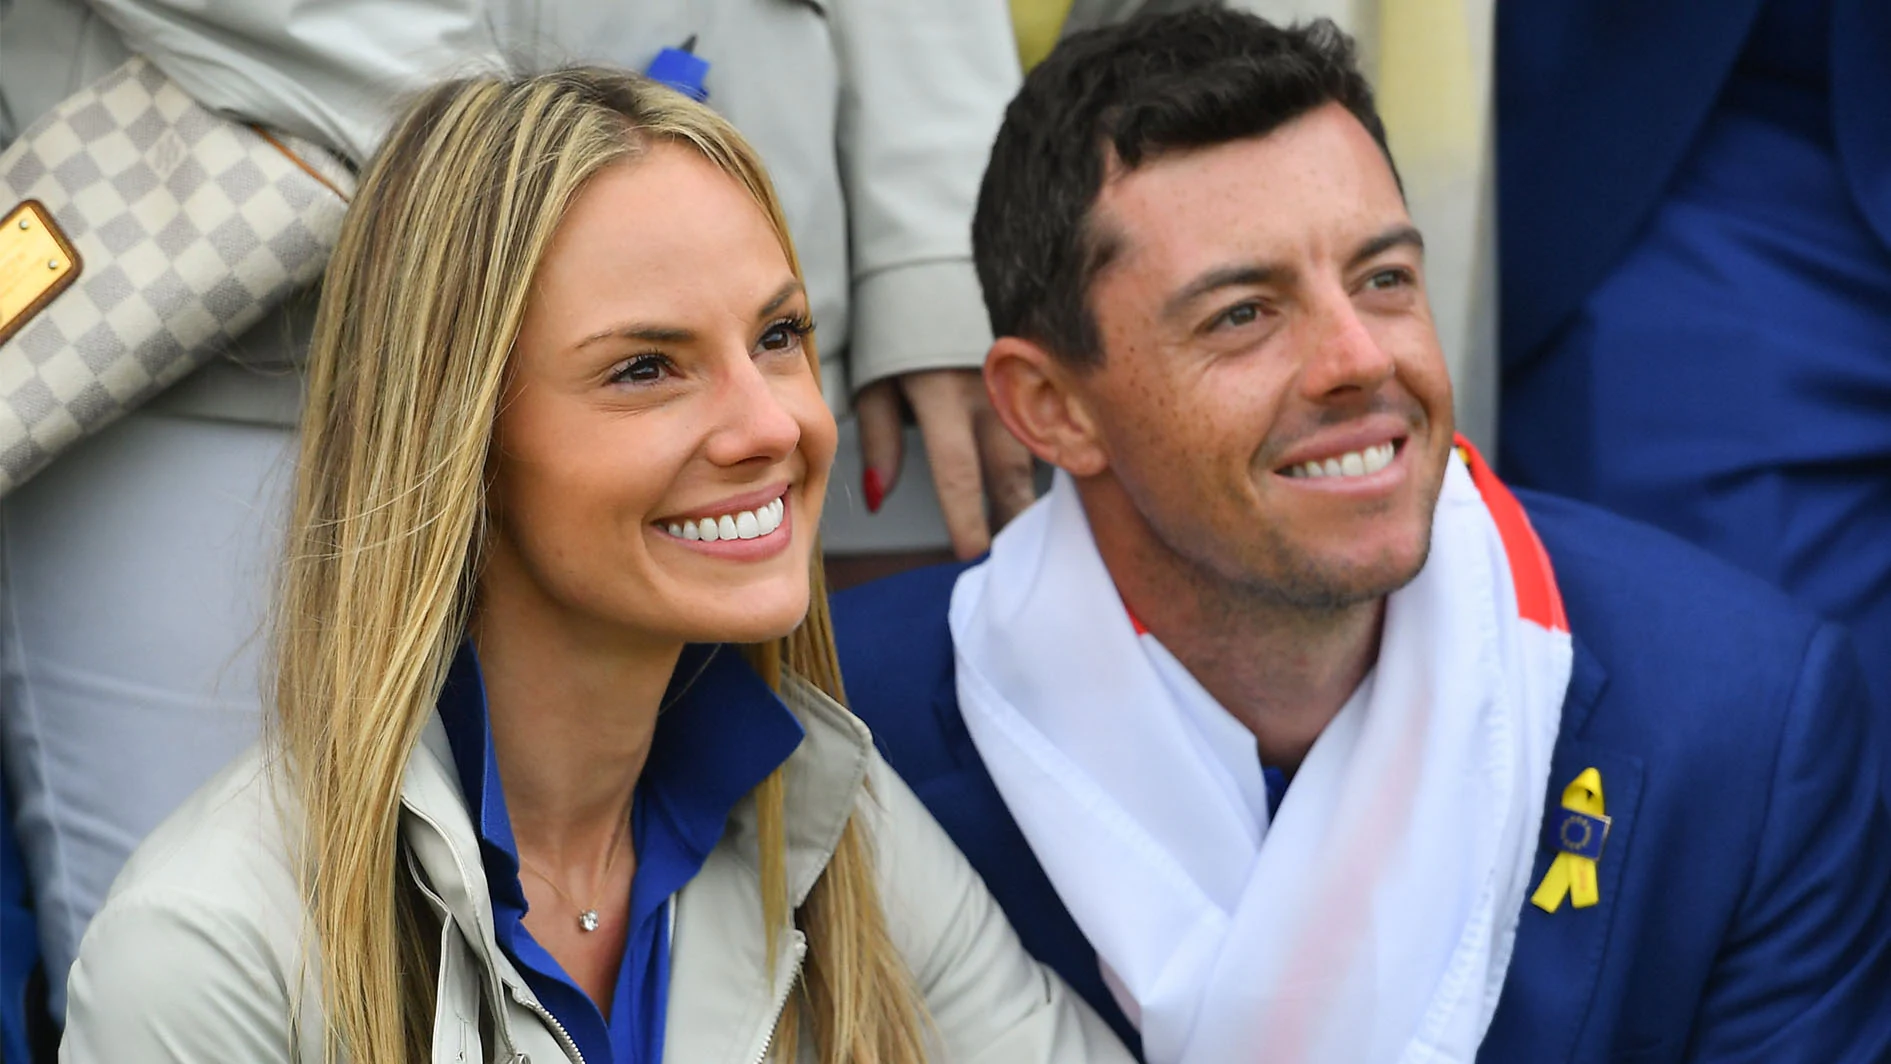 #GirlDad: Rory, Erica McIlroy welcome first child ahead of Tour Championship